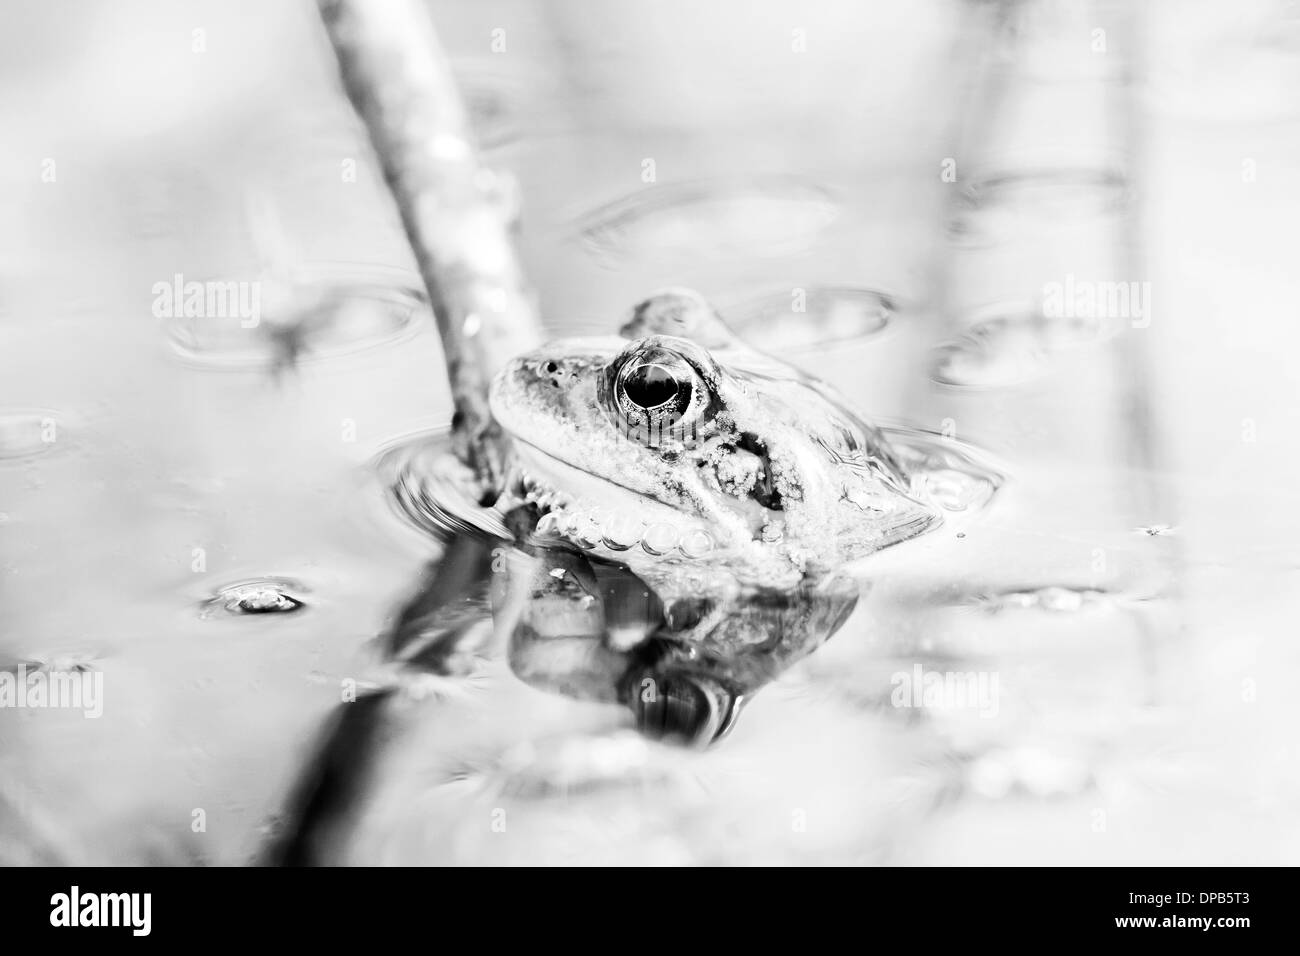 Small grass frog in water near a plant straw Stock Photo